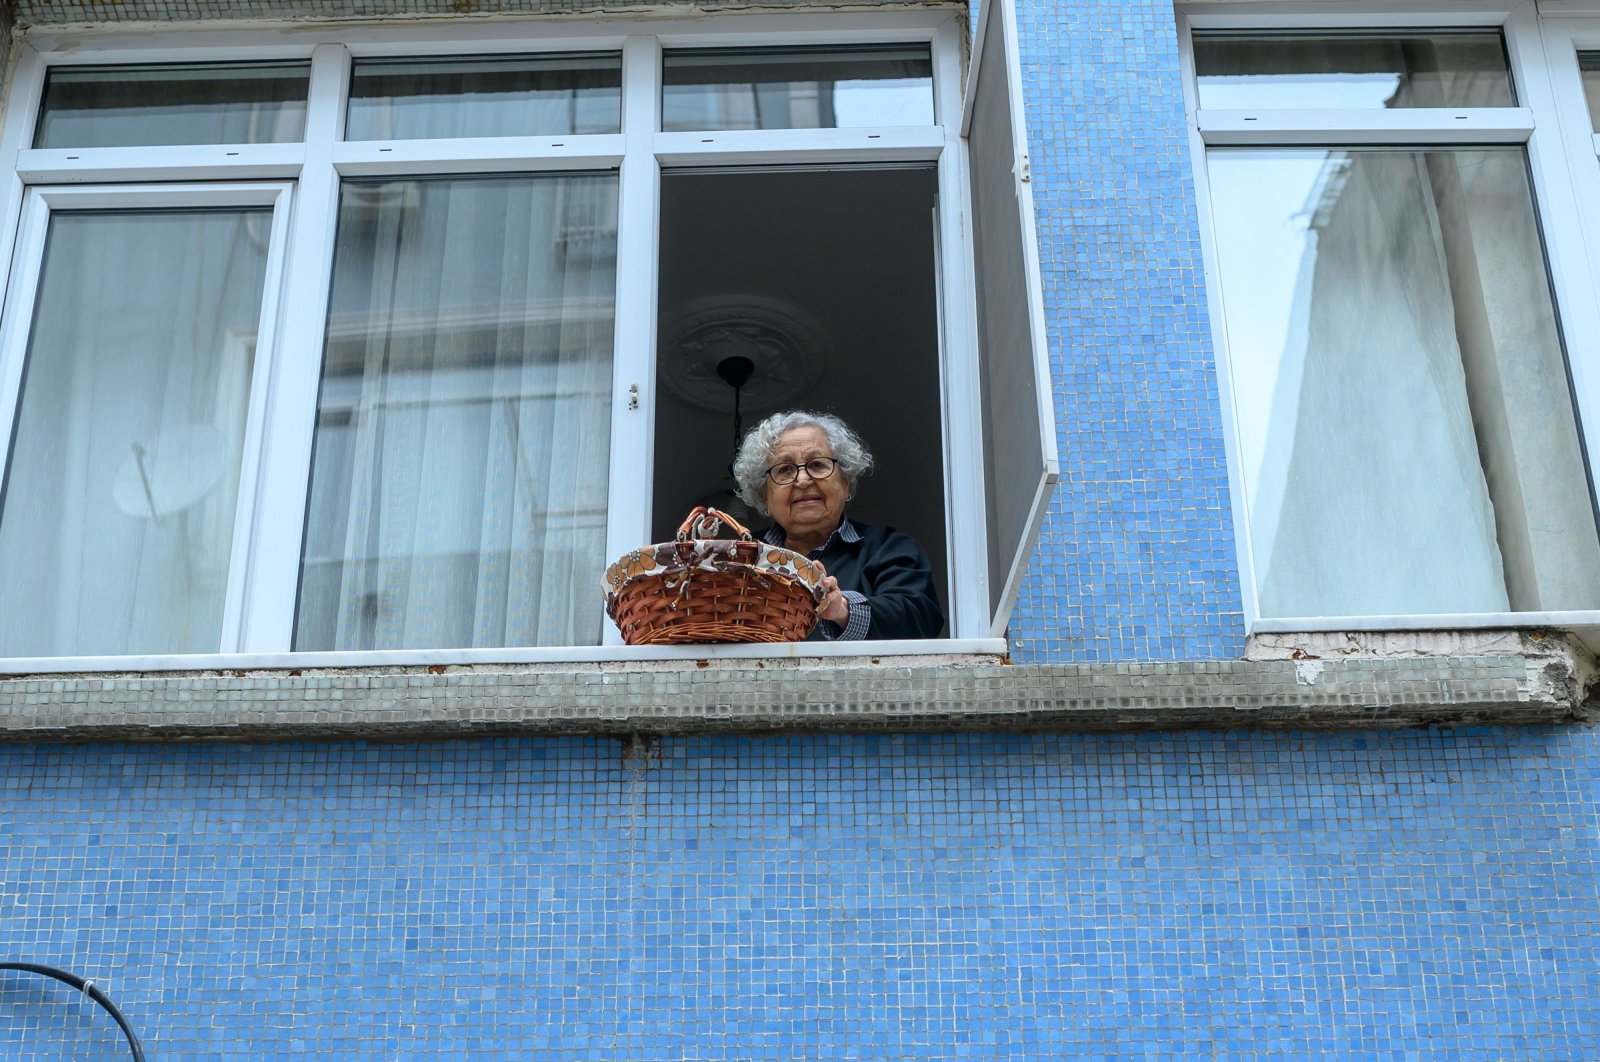 Lütfiye Yeşilbaş, an 89-year-old Turkish woman who lives alone in her home, lowers her basket in Kadıköy, Istanbul, Monday, March 23, 2020. (AFP Photo)